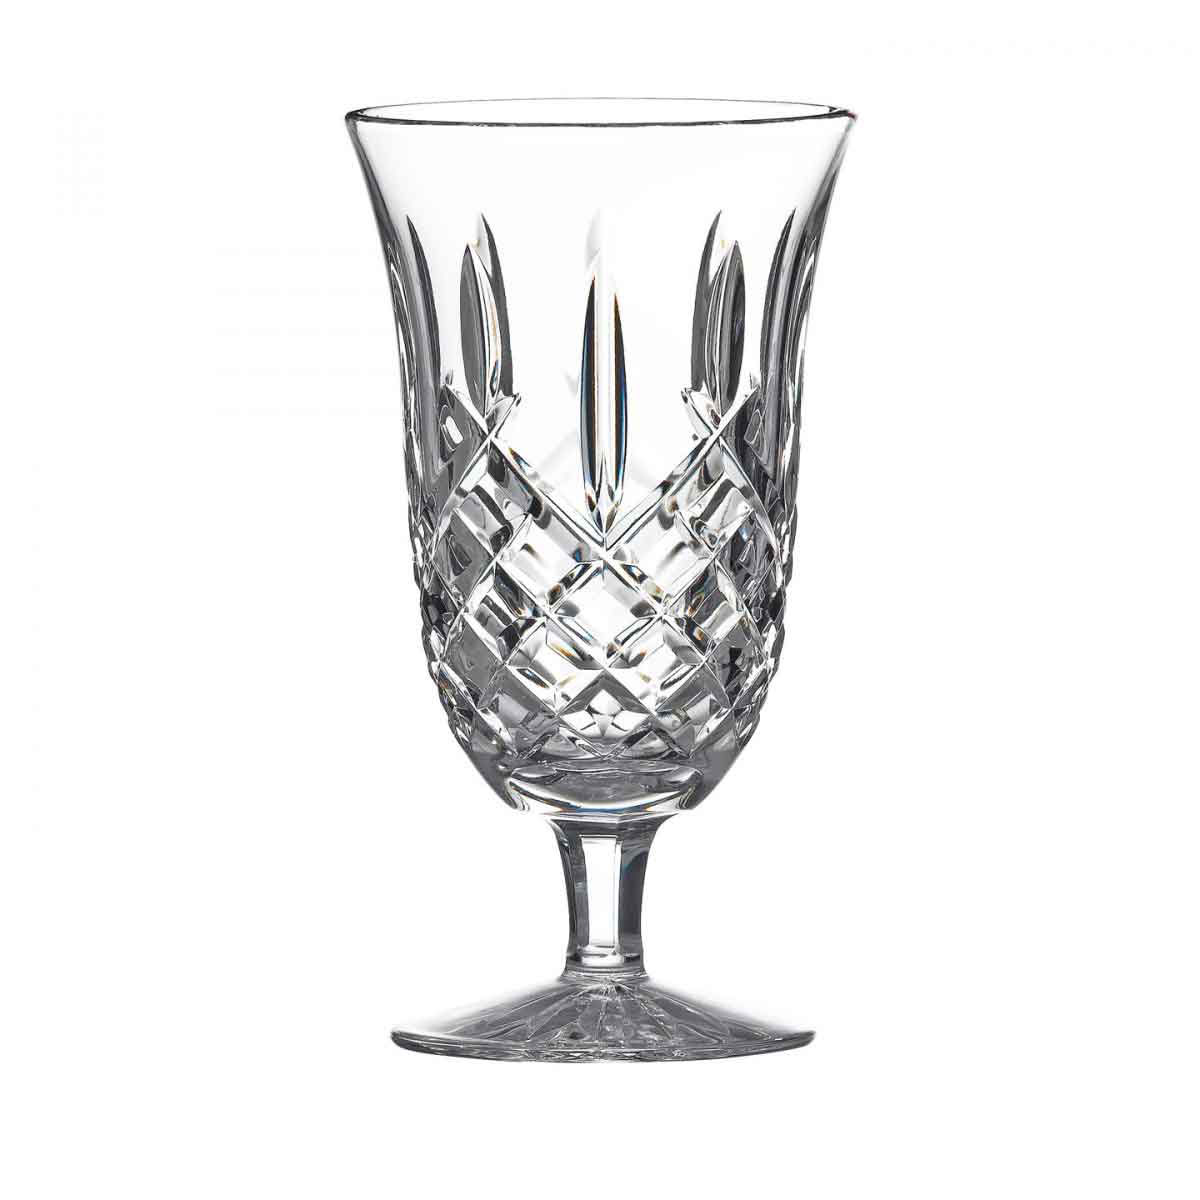 Waterford Araglin Footed Crystal Iced Beverage, Single